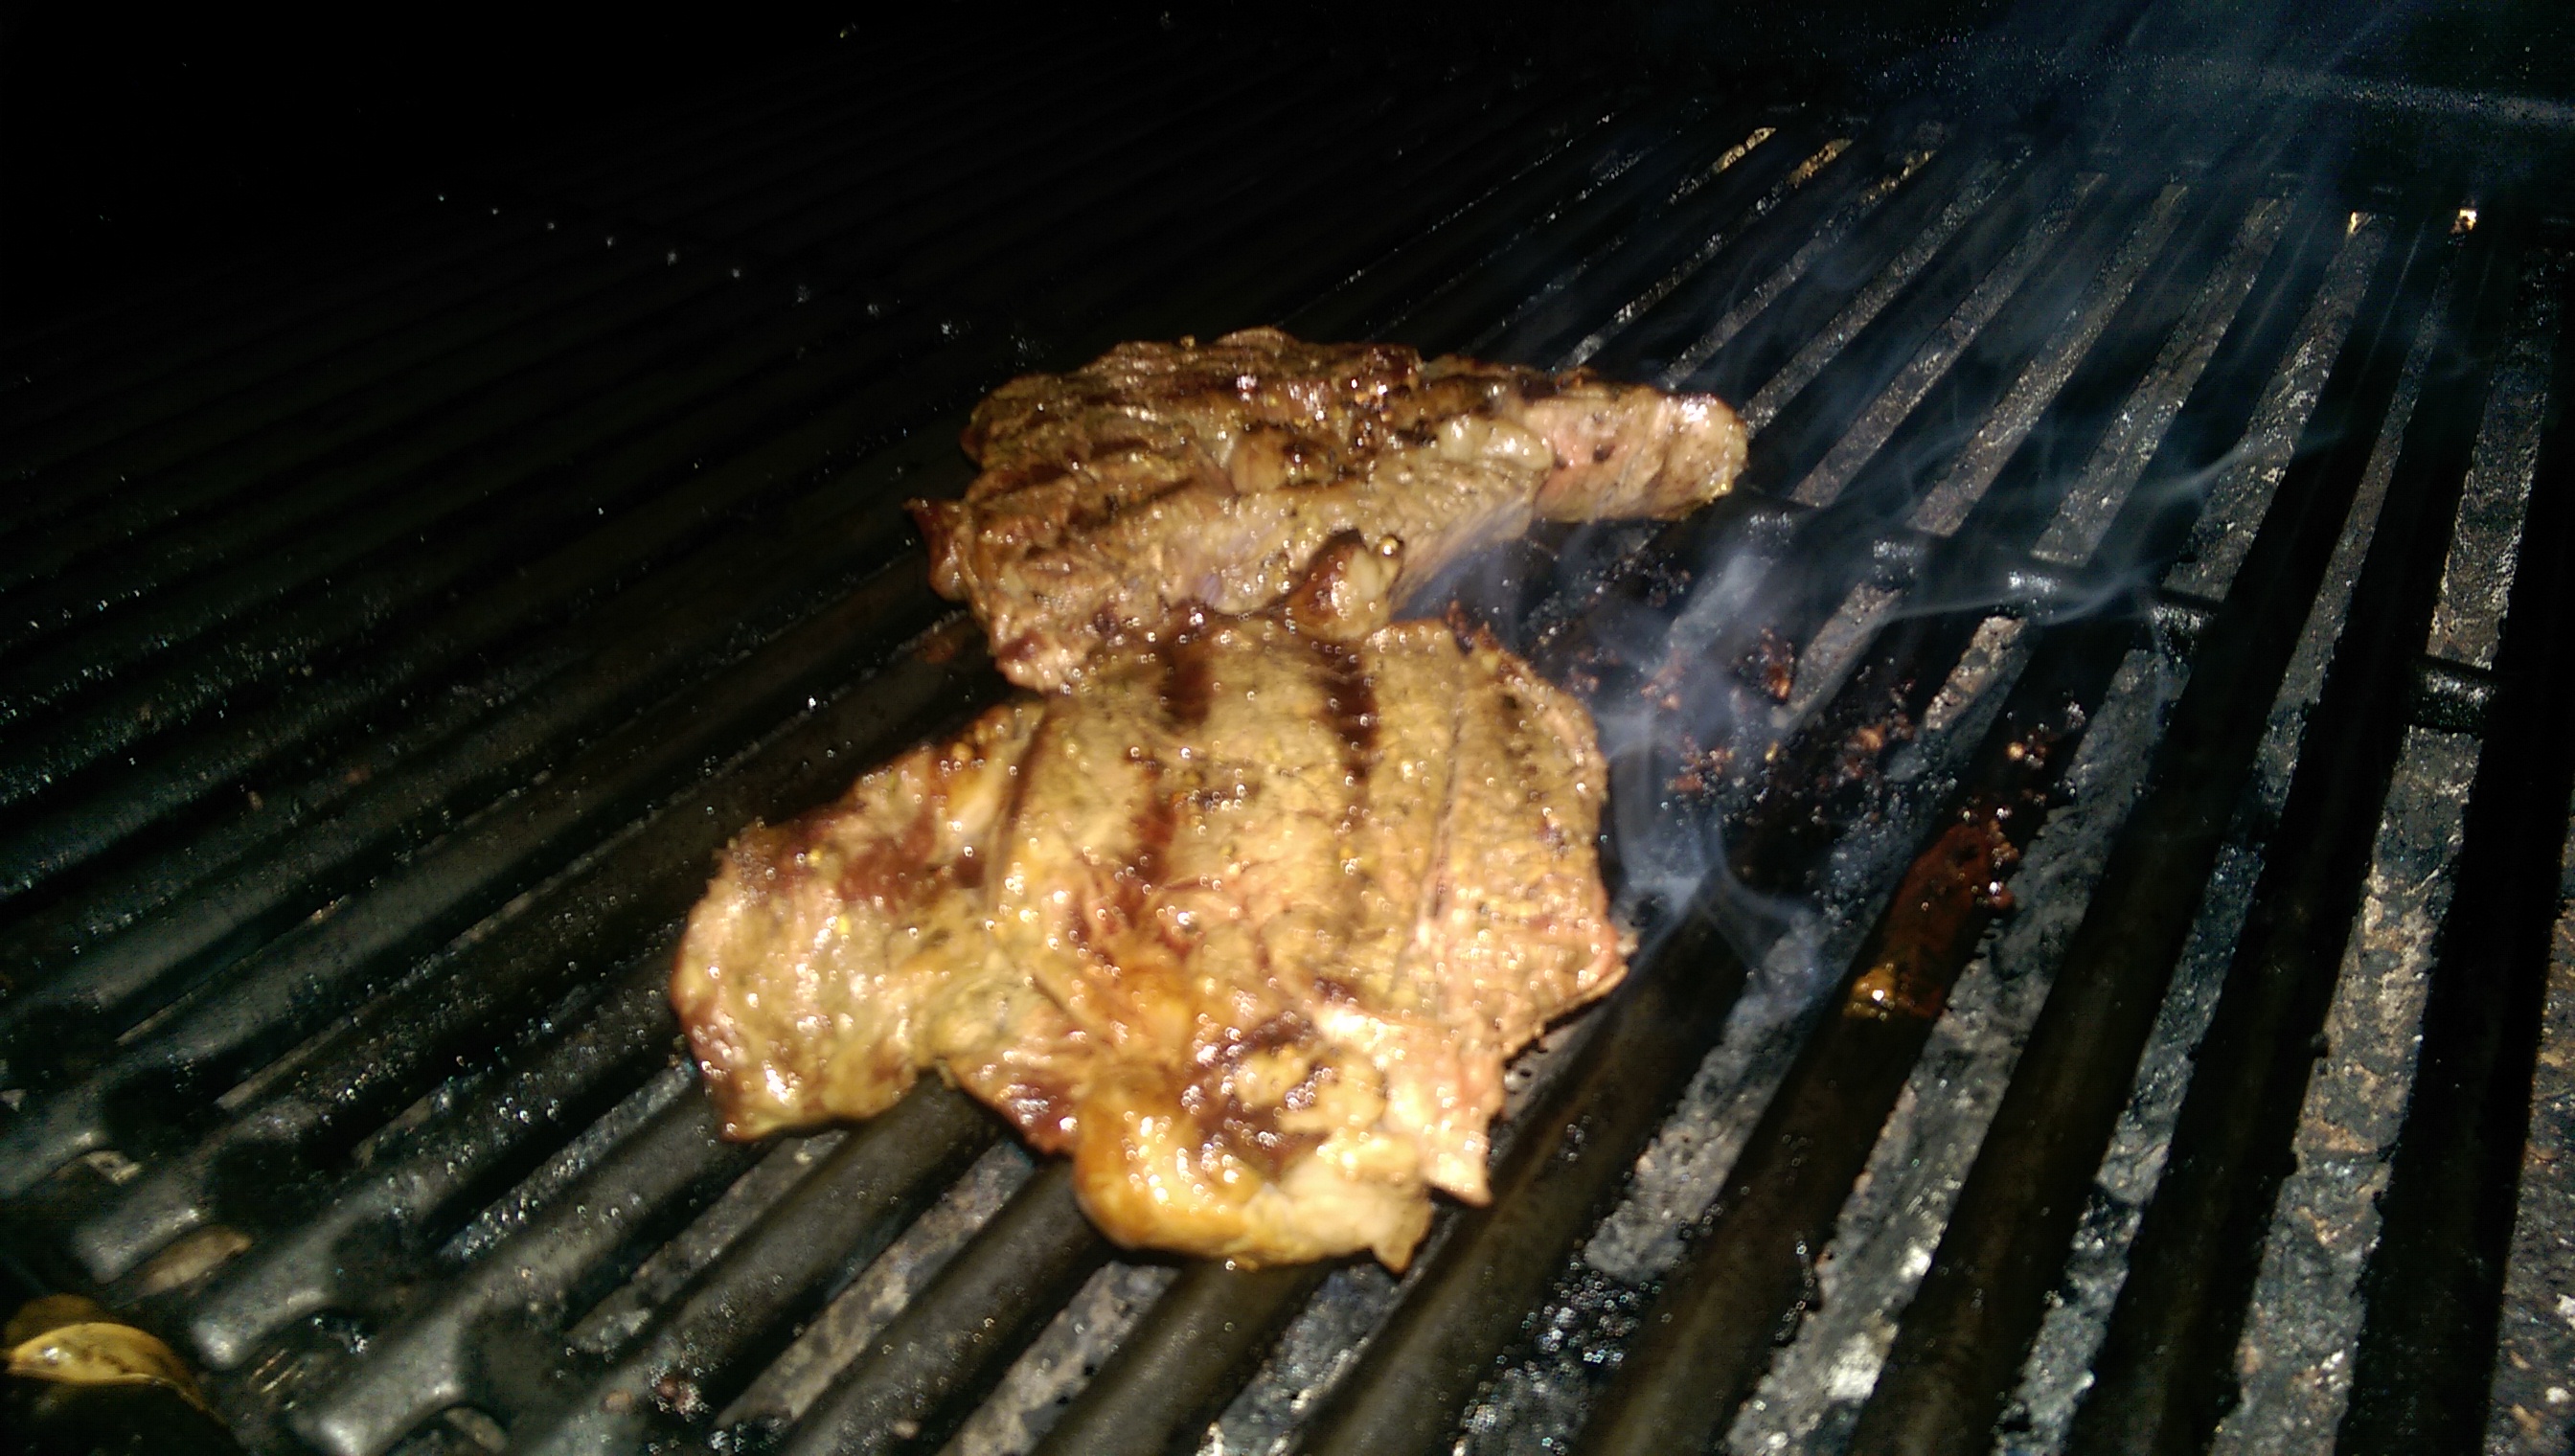 Grilled steaks photo